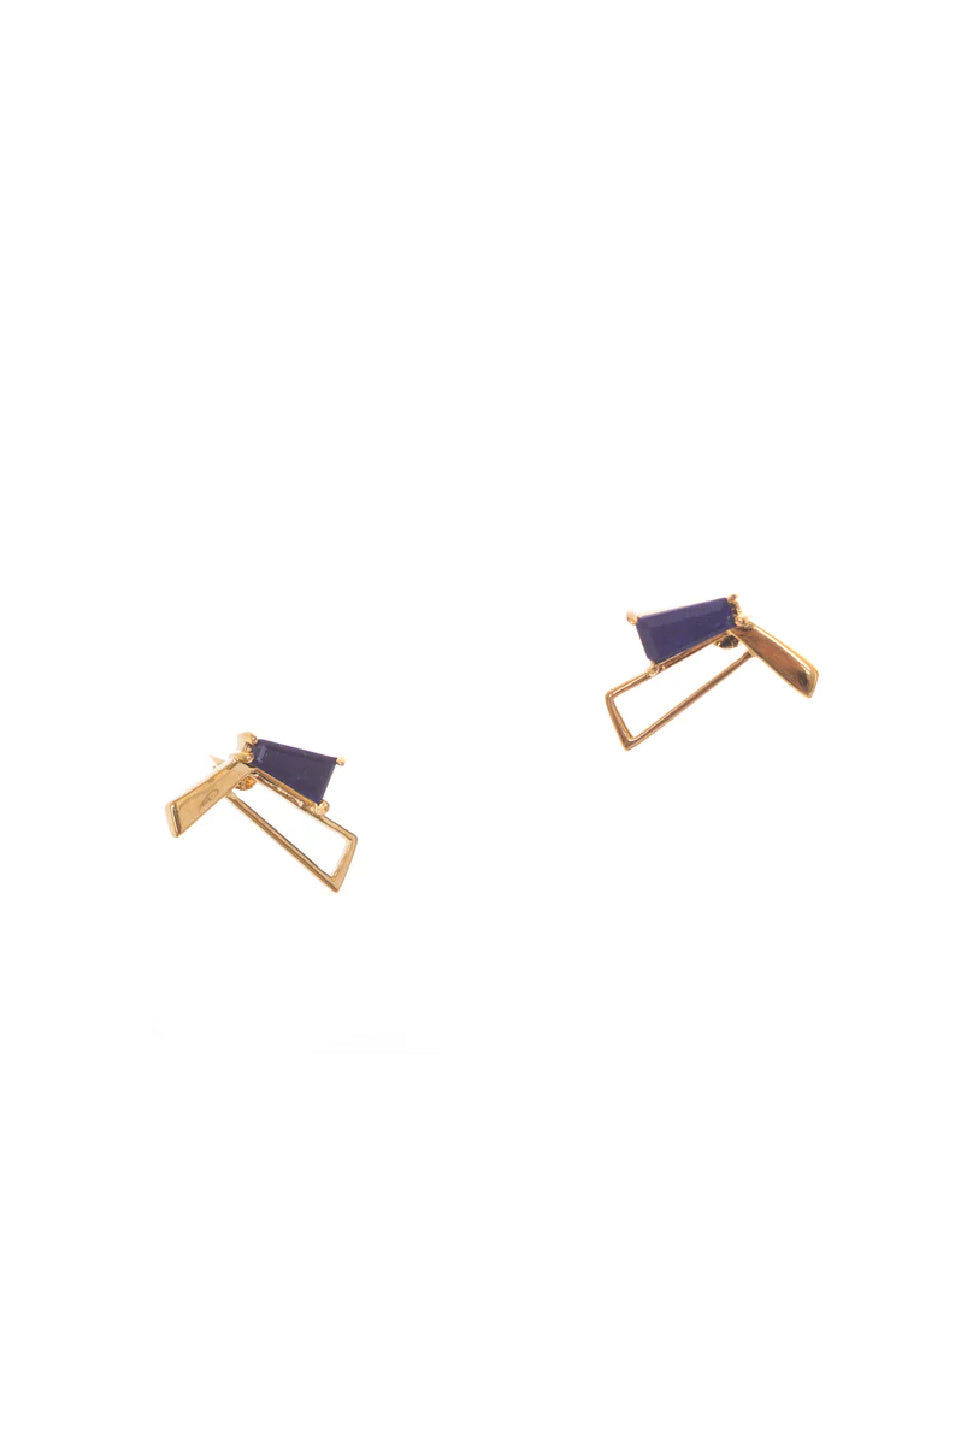 Beautifully crafted, these Herringbone Earrings were designed to mimic an intricate herringbone pattern. Featuring hand-cut genuine gemstones and gold-plating, these earrings are design-forward and unique. Available in Lapis, Malachite & Ruby Zoisite.  Size: 18x21mm  14K gold-plated brass 14K Vermeil ear posts Artisan-cut natural gemstones  Castings made in Thailand Paired & finished in Vancouver BCHailey Gerrits Herringbone Earrings (Lapis)